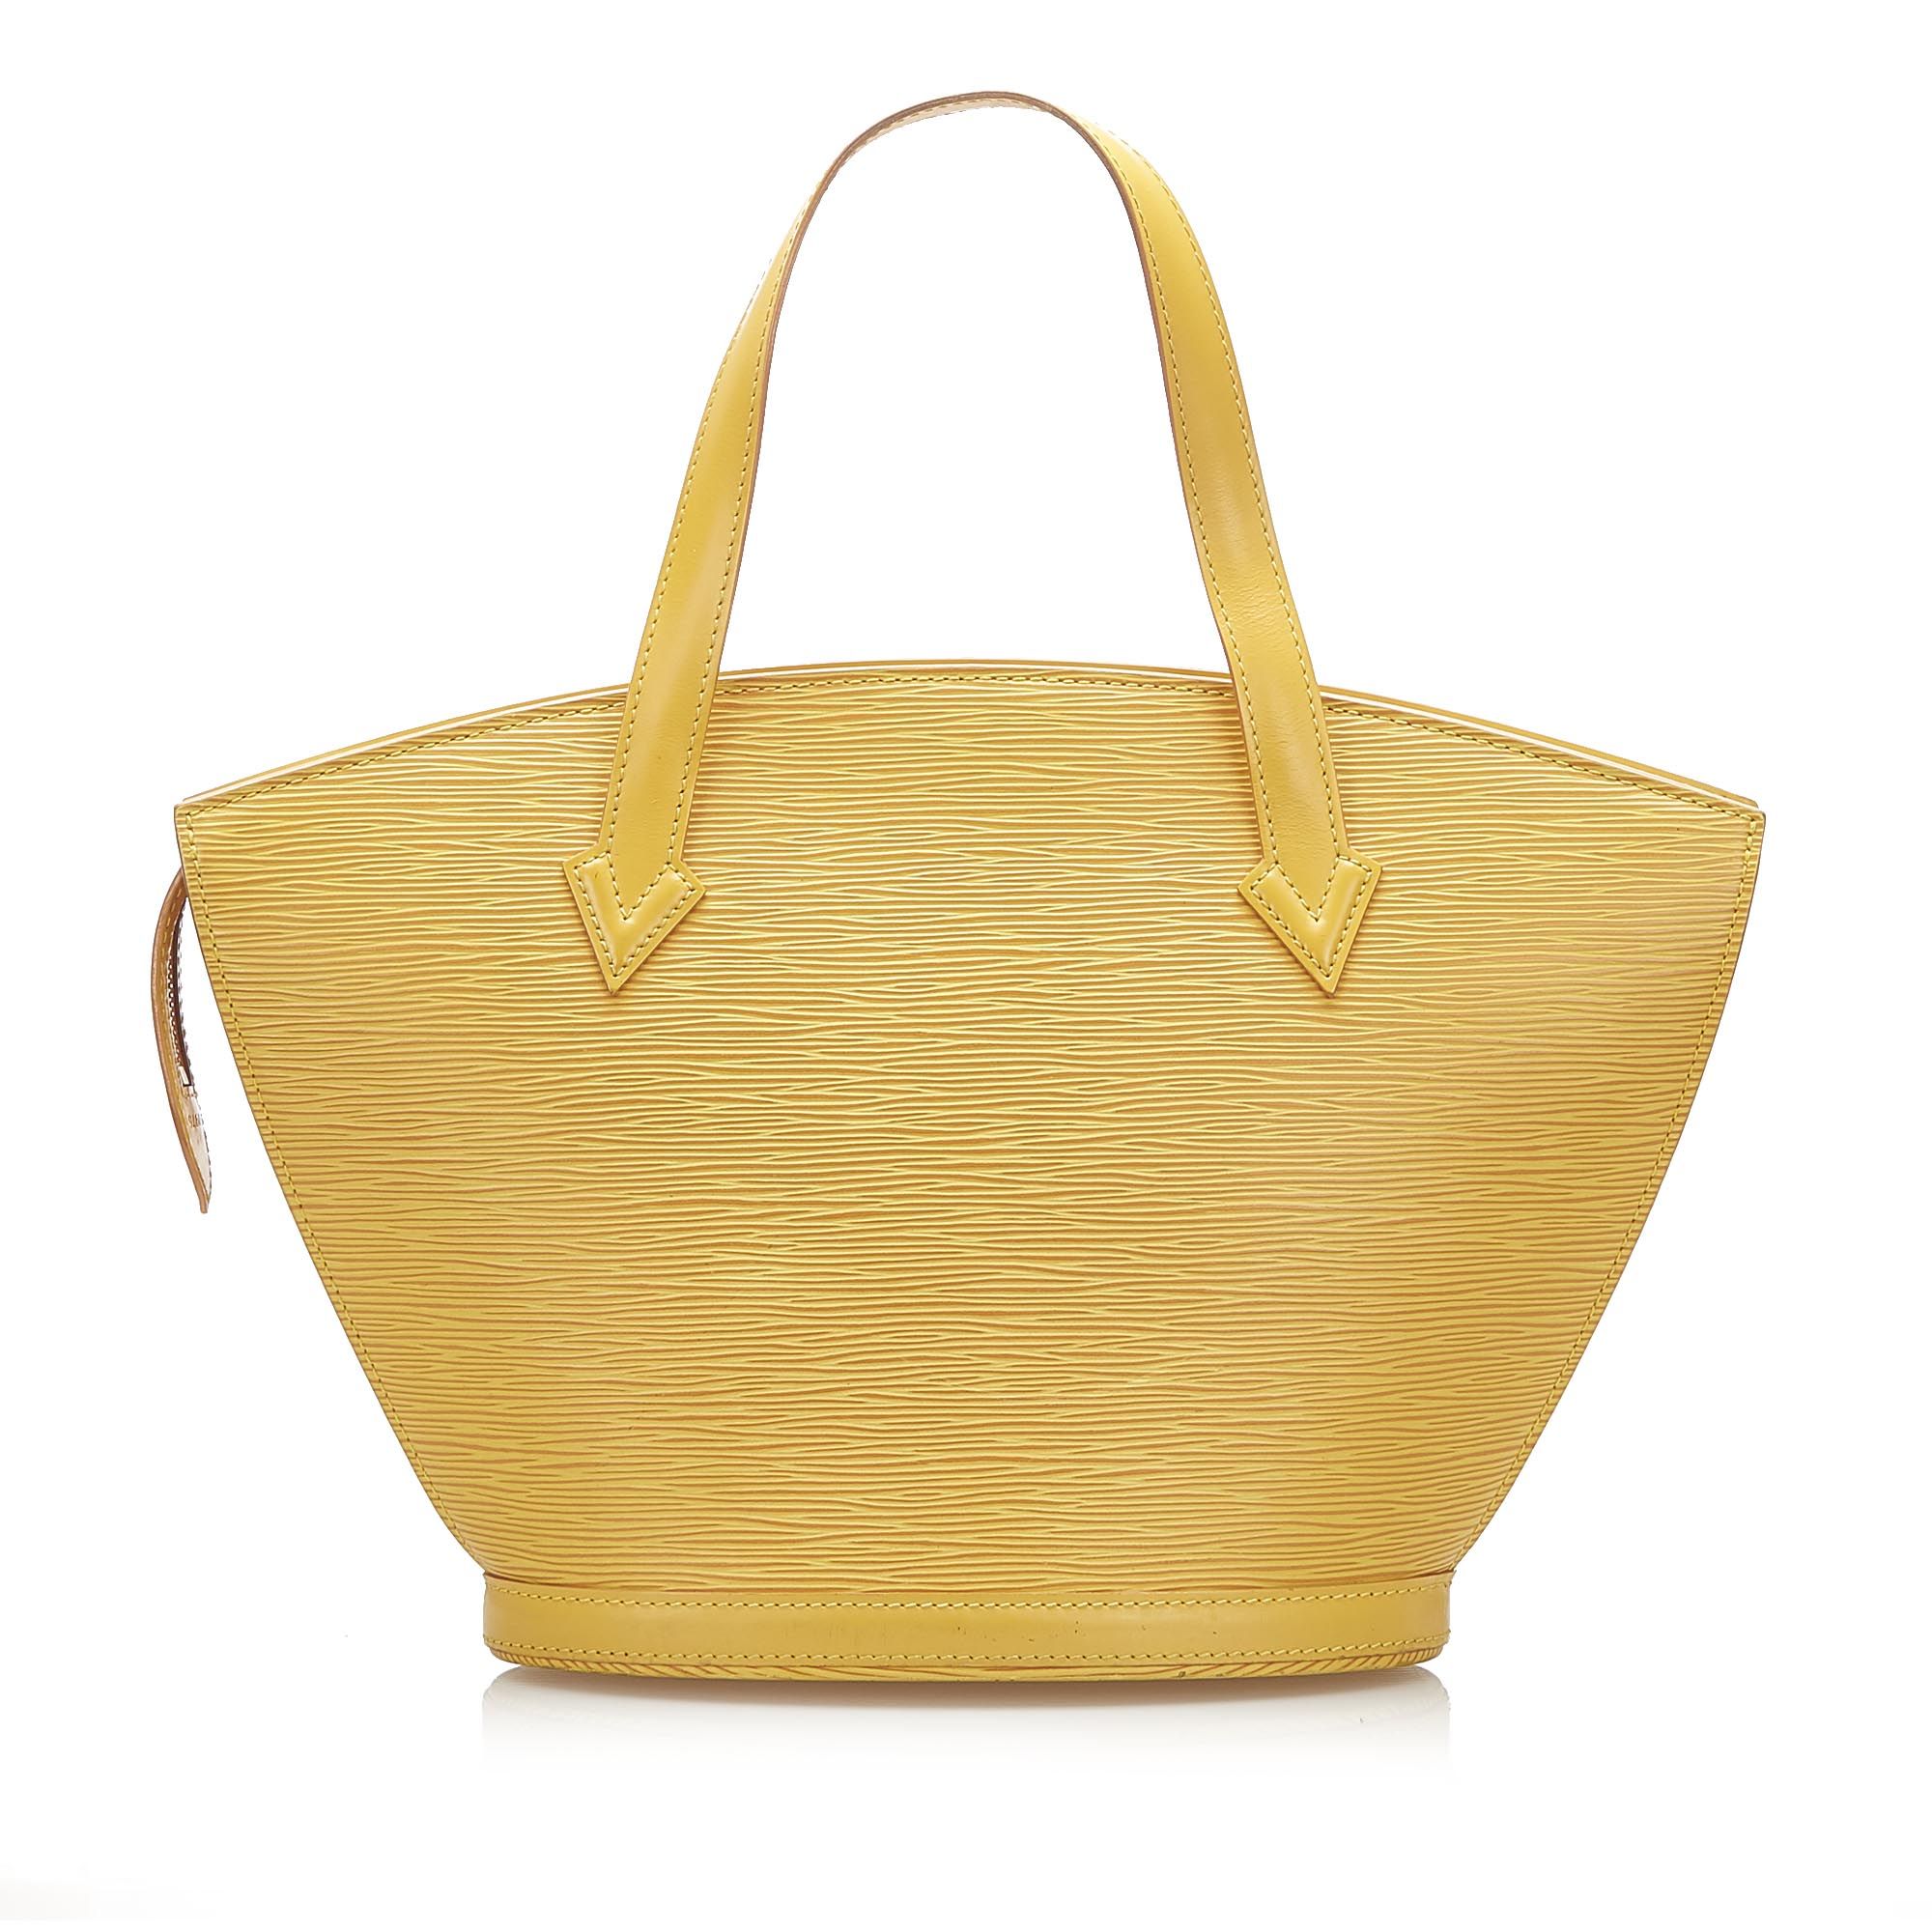 VINTAGE. RRP AS NEW. The Saint Jacques features an epi leather body, a top zip closure, and an interior slip pocket.
Dimensions:
Length 24cm
Width 38cm
Depth 10cm
Hand Drop 13cm
Shoulder Drop 24cm

Original Accessories: This item has no other original accessories.

Serial Number: VI0976
Color: Yellow
Material: Leather x Epi Leather
Country of Origin: France
Boutique Reference: SSU96303K1342


Product Rating: GoodCondition